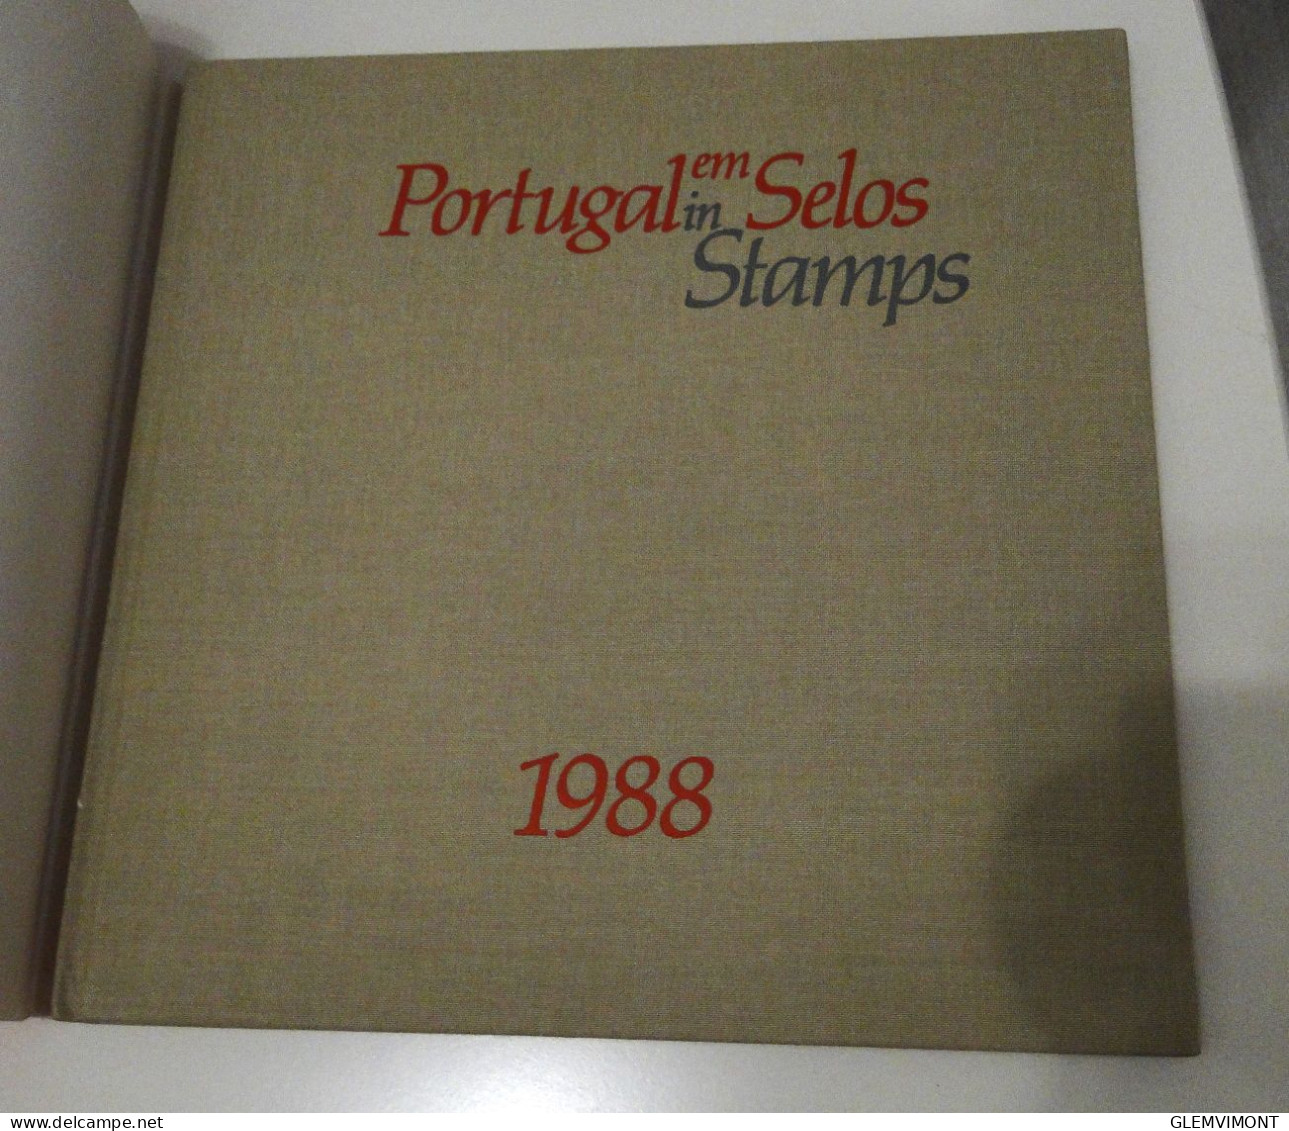 PORTUGAL EM SELOS Le Portugal En Timbres Année 1988 COMPLET - Book Of The Year